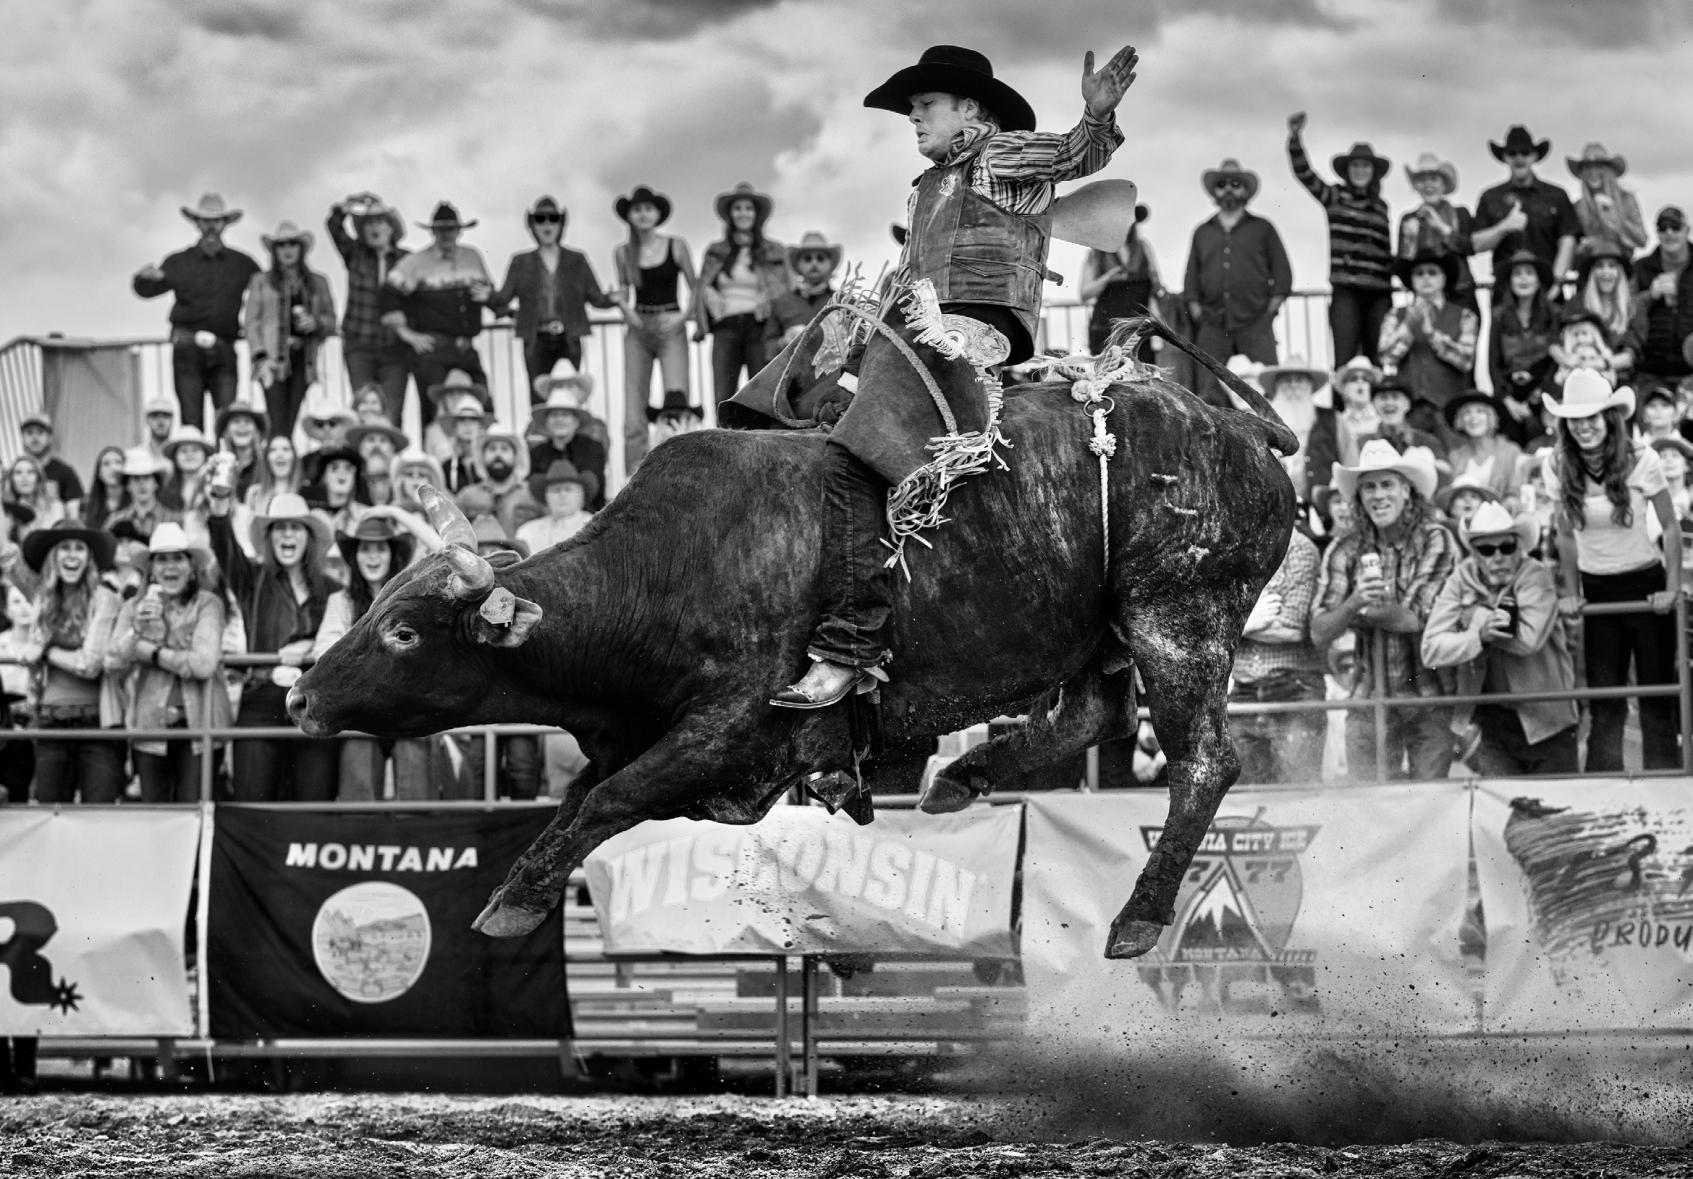 David Yarrow Black and White Photograph - 'Ride the Bull' - Rodeo Rider on the Bull, fine art photography, 2023